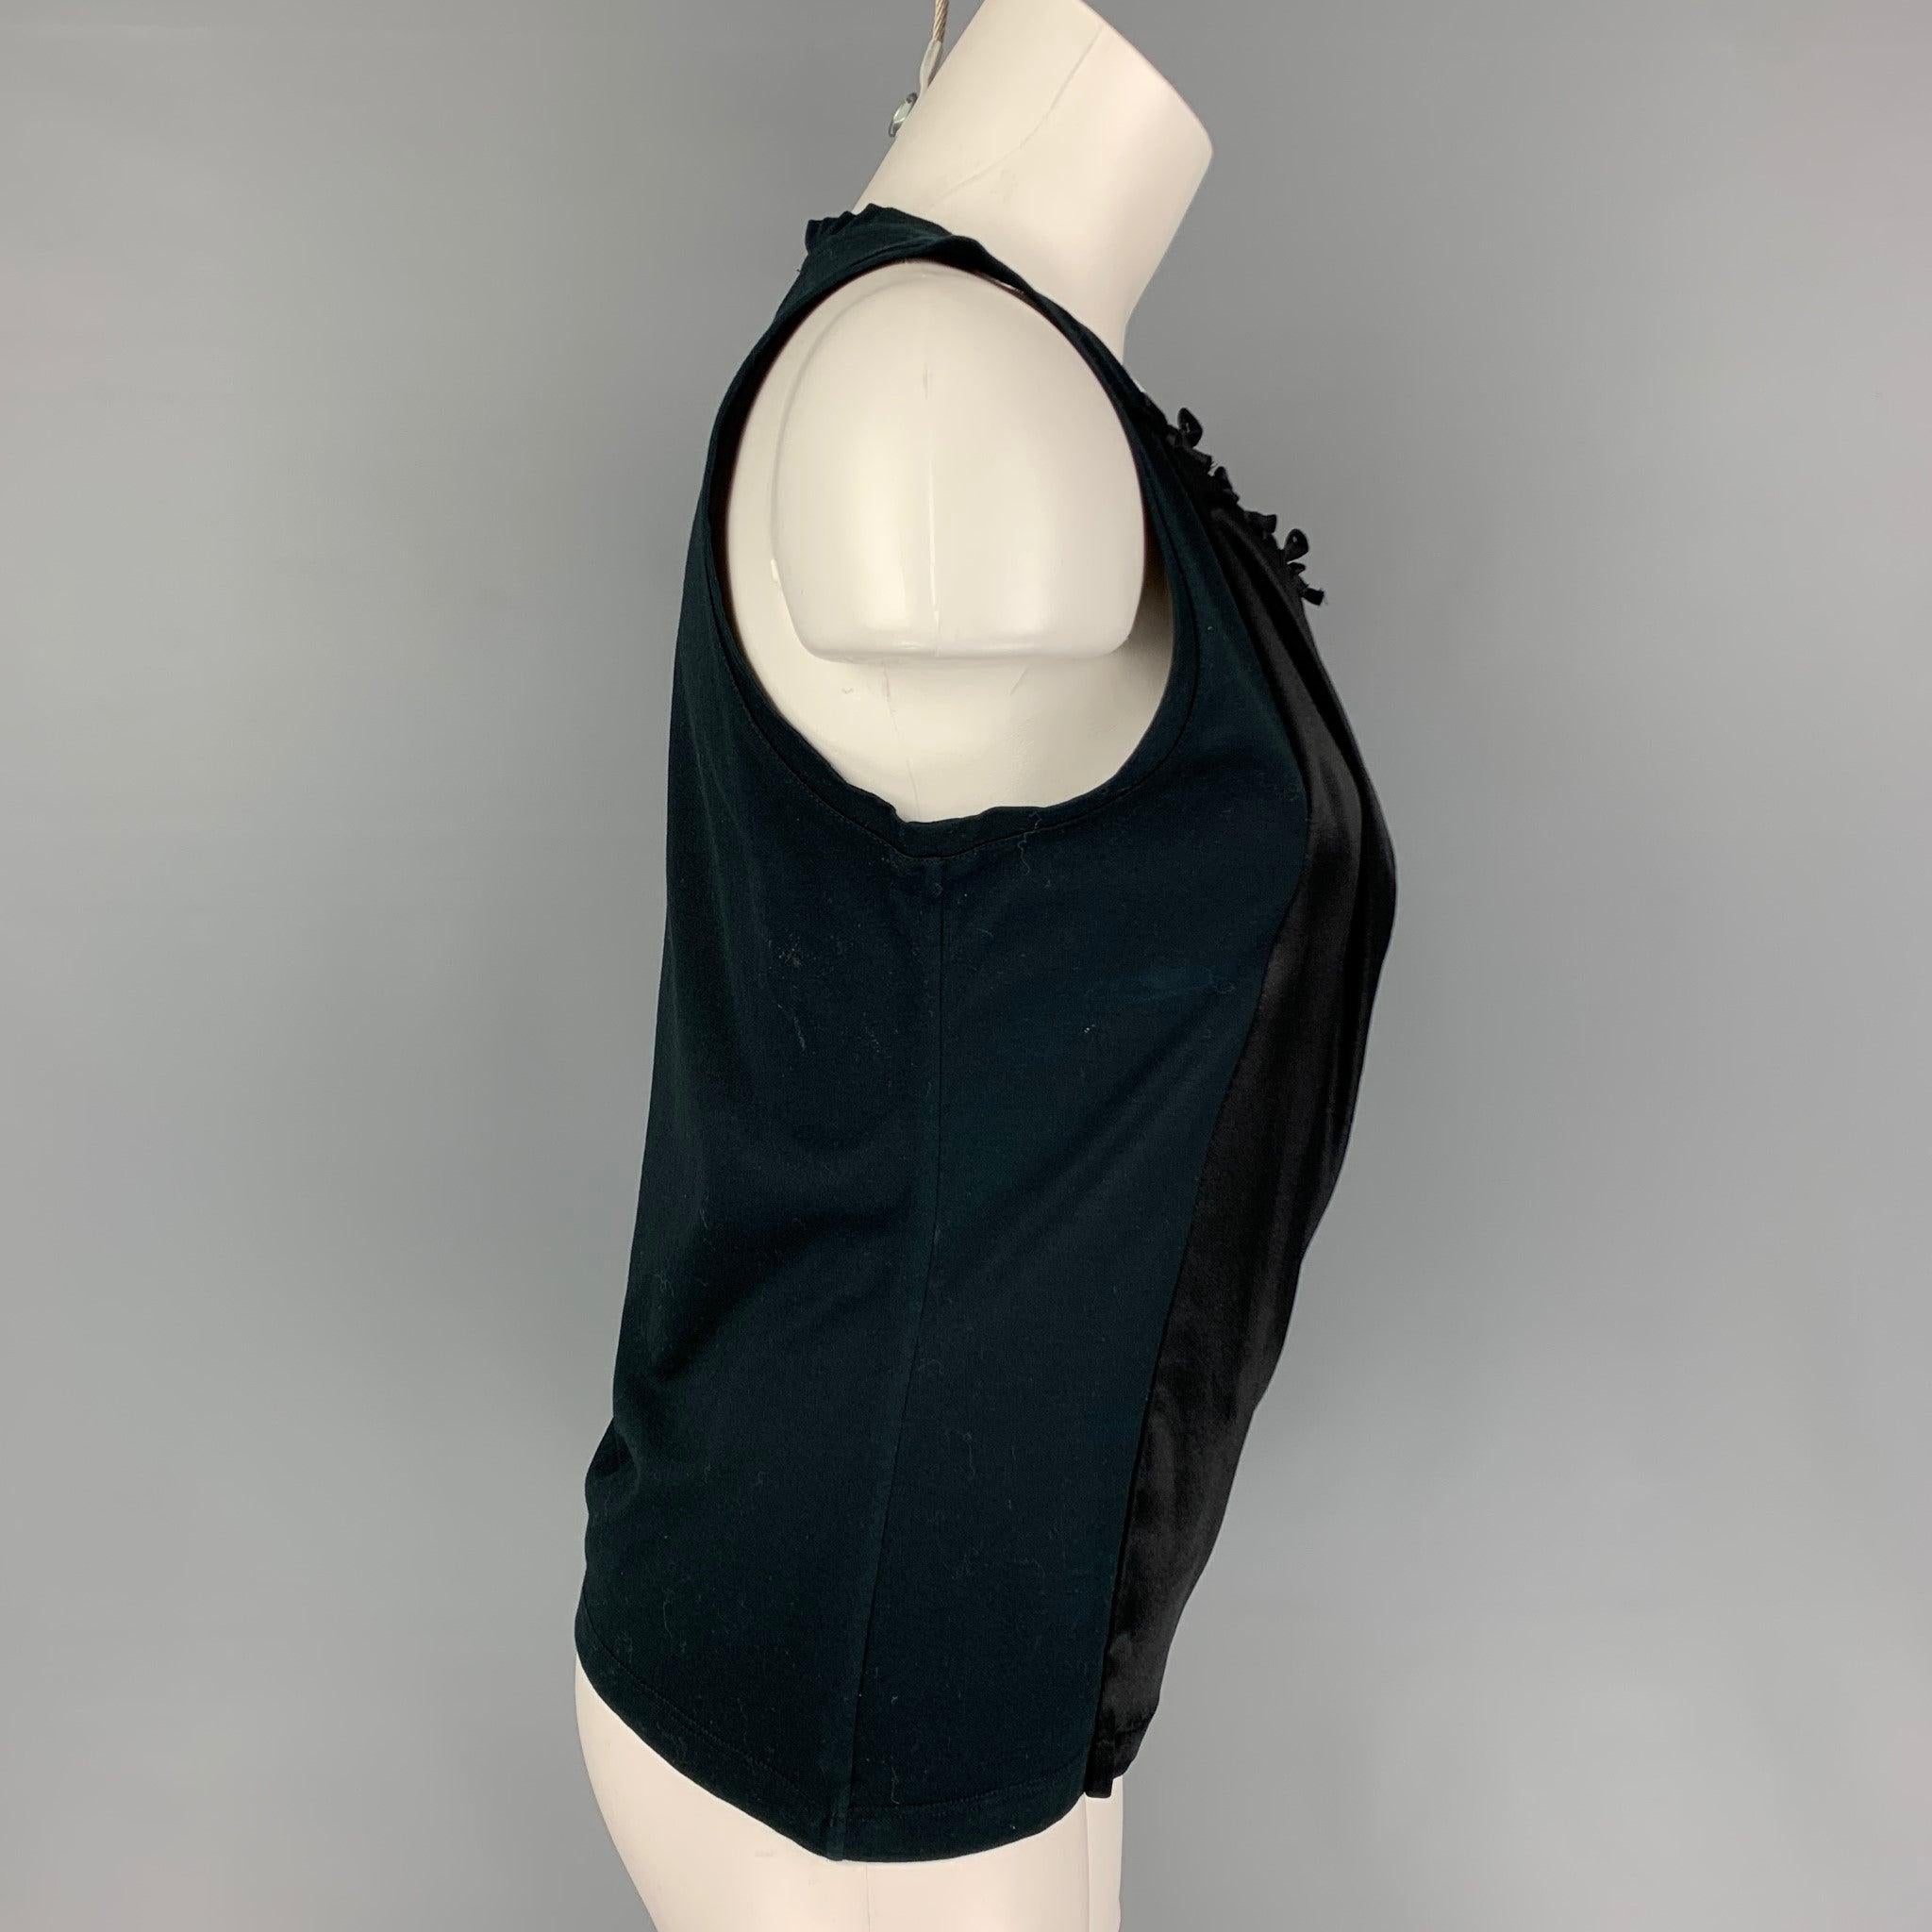 YVES SAINT LAURENT top comes in a black cotton featuring a front silk panel and small bow details. Made in Italy.
Very Good
Pre-Owned Condition. 

Marked:   S 

Measurements: 
 
Shoulder: 11.5 inches  Bust: 32 inches  Length: 21 inches 
  
  
